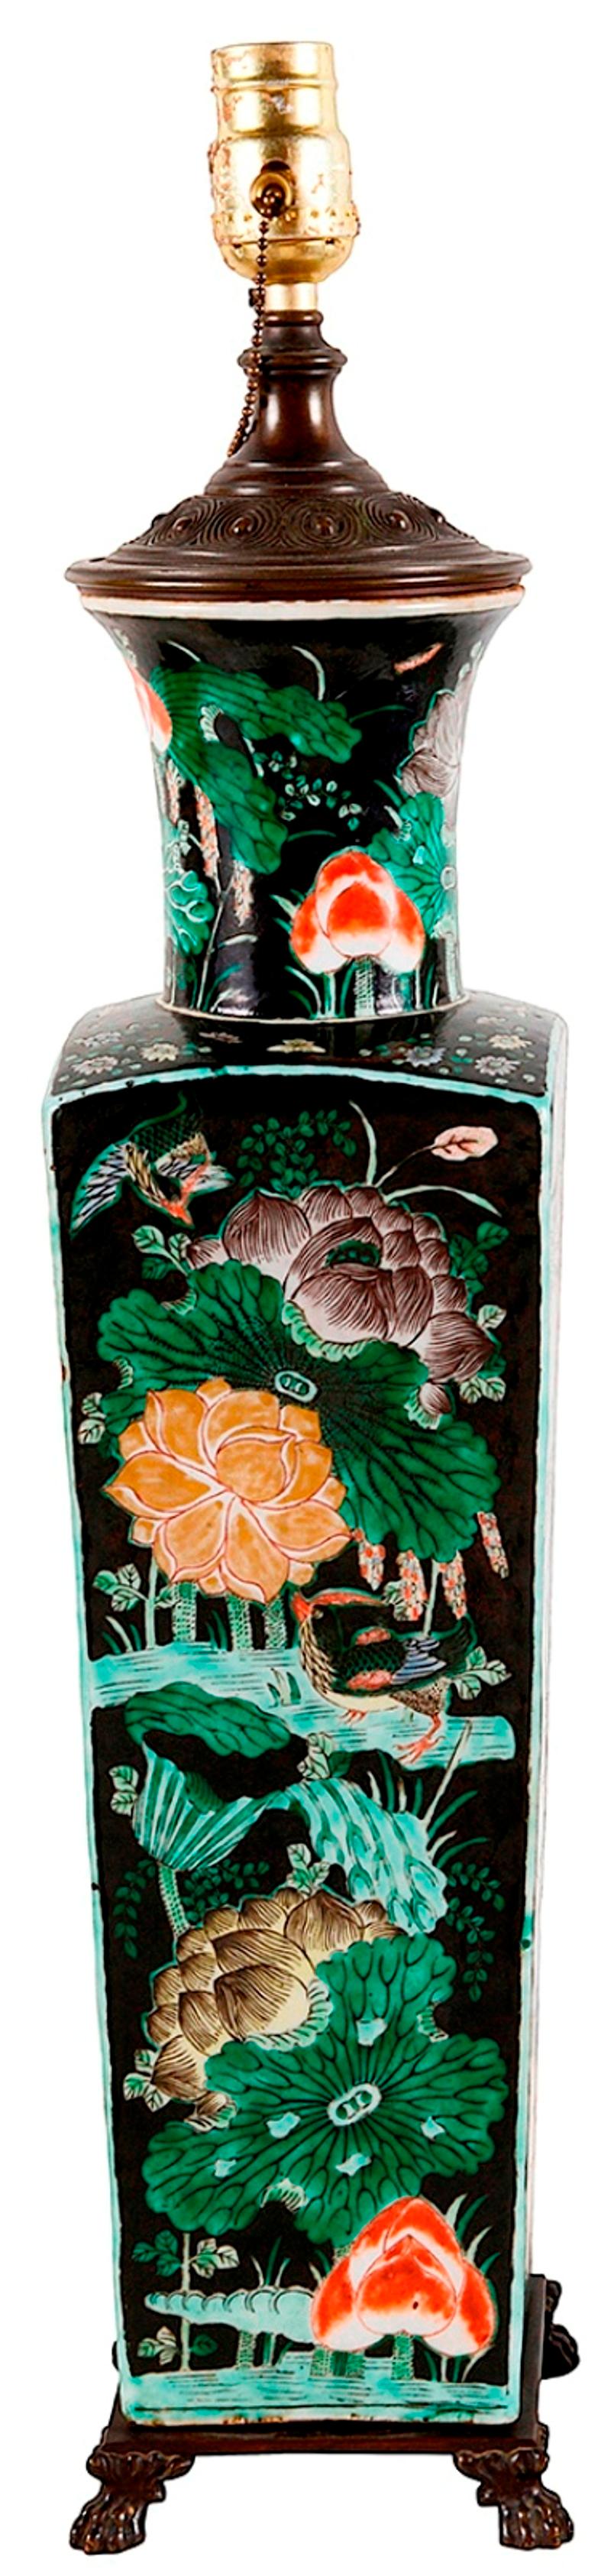 Chinese Export 19th Century Chinese Famille Noire Porcelain Vase / Lamp For Sale